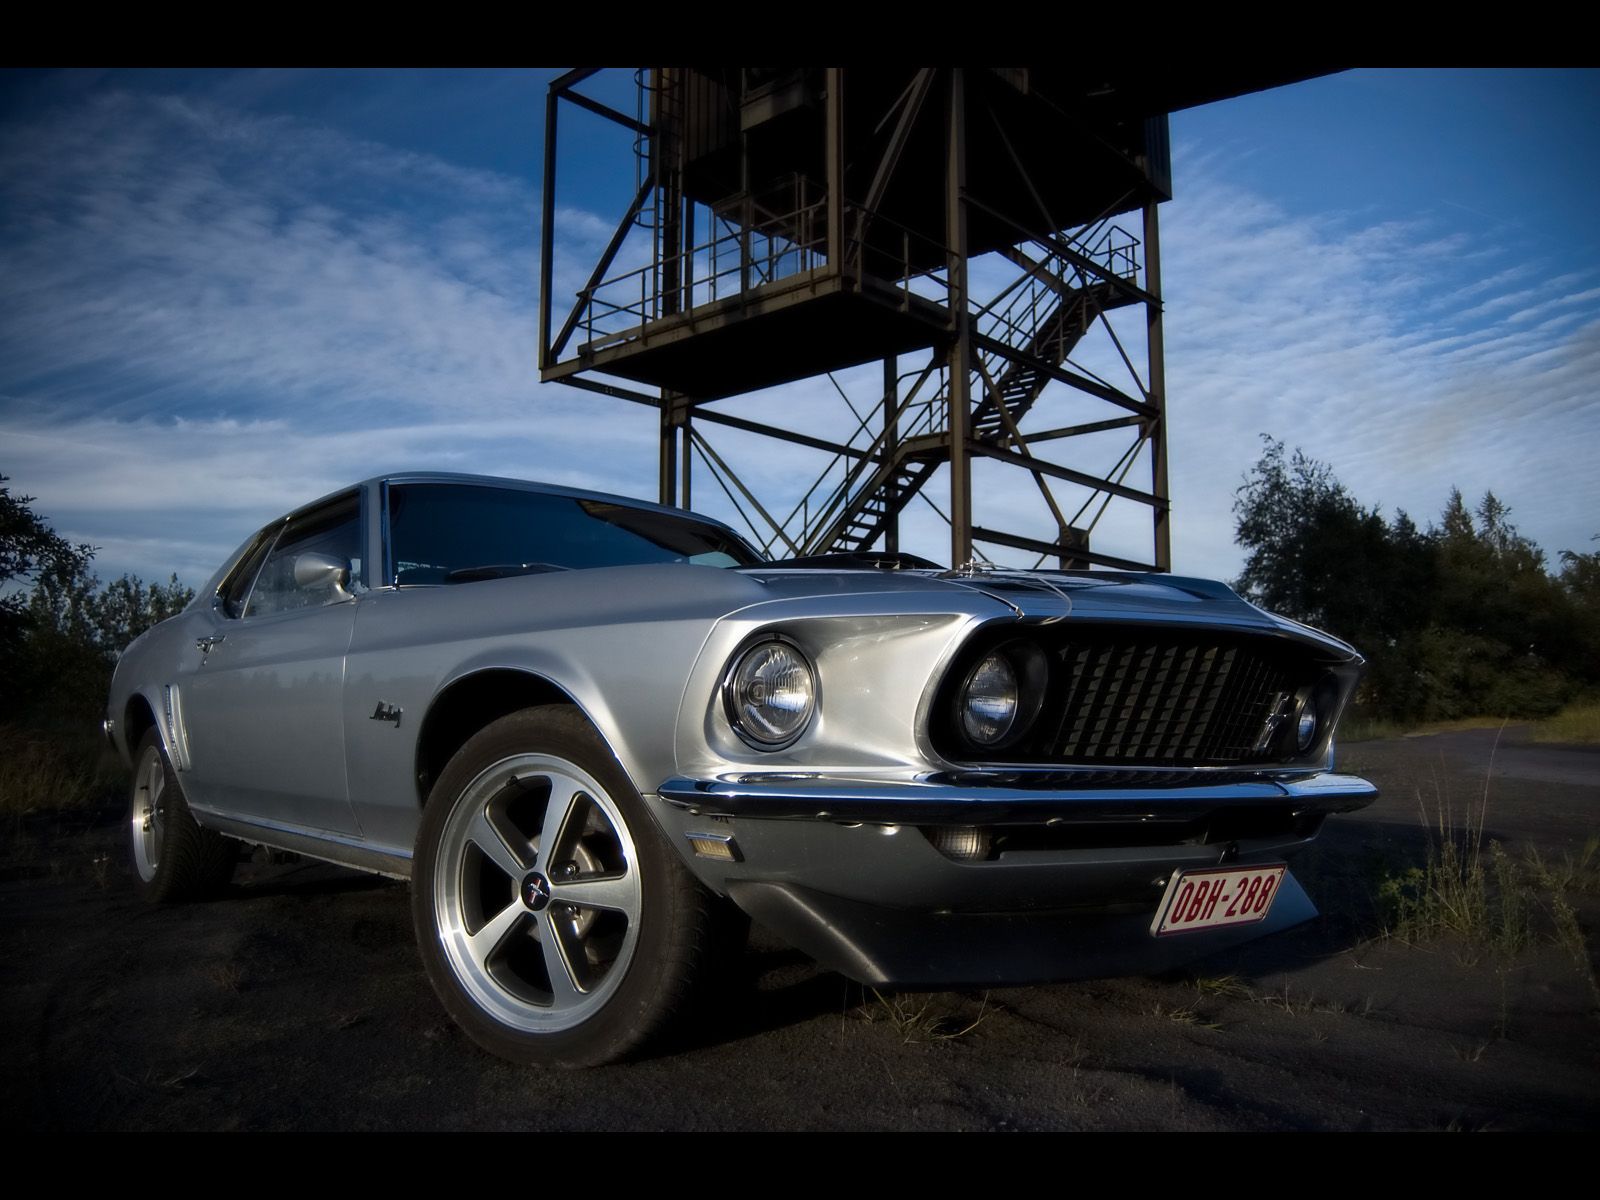 1969 Ford Mustang Hardtop - Tower - 1600x1200 - Wallpaper